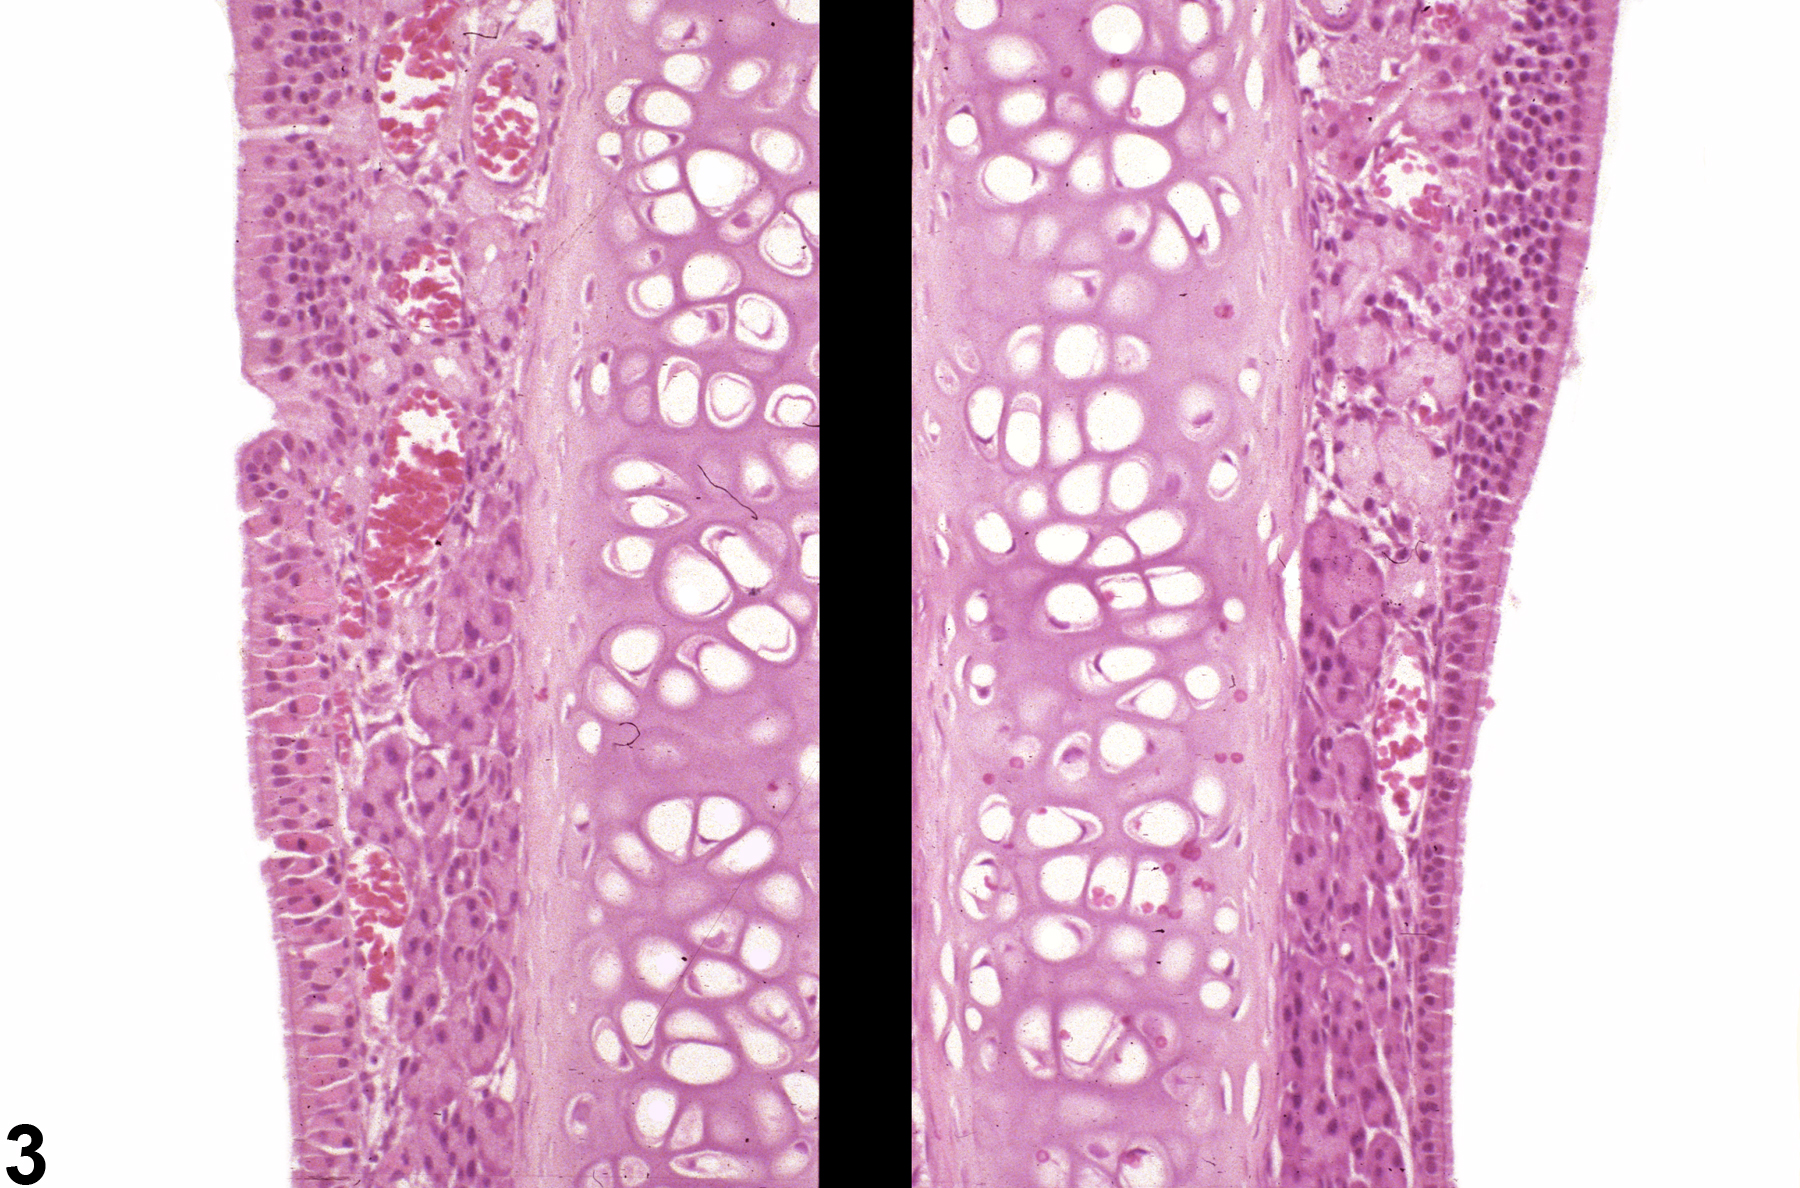 Image of accumulation, hyaline droplet in the nose, respiratory epithelium from a female B6C3F1/N mouse in a subchronic study